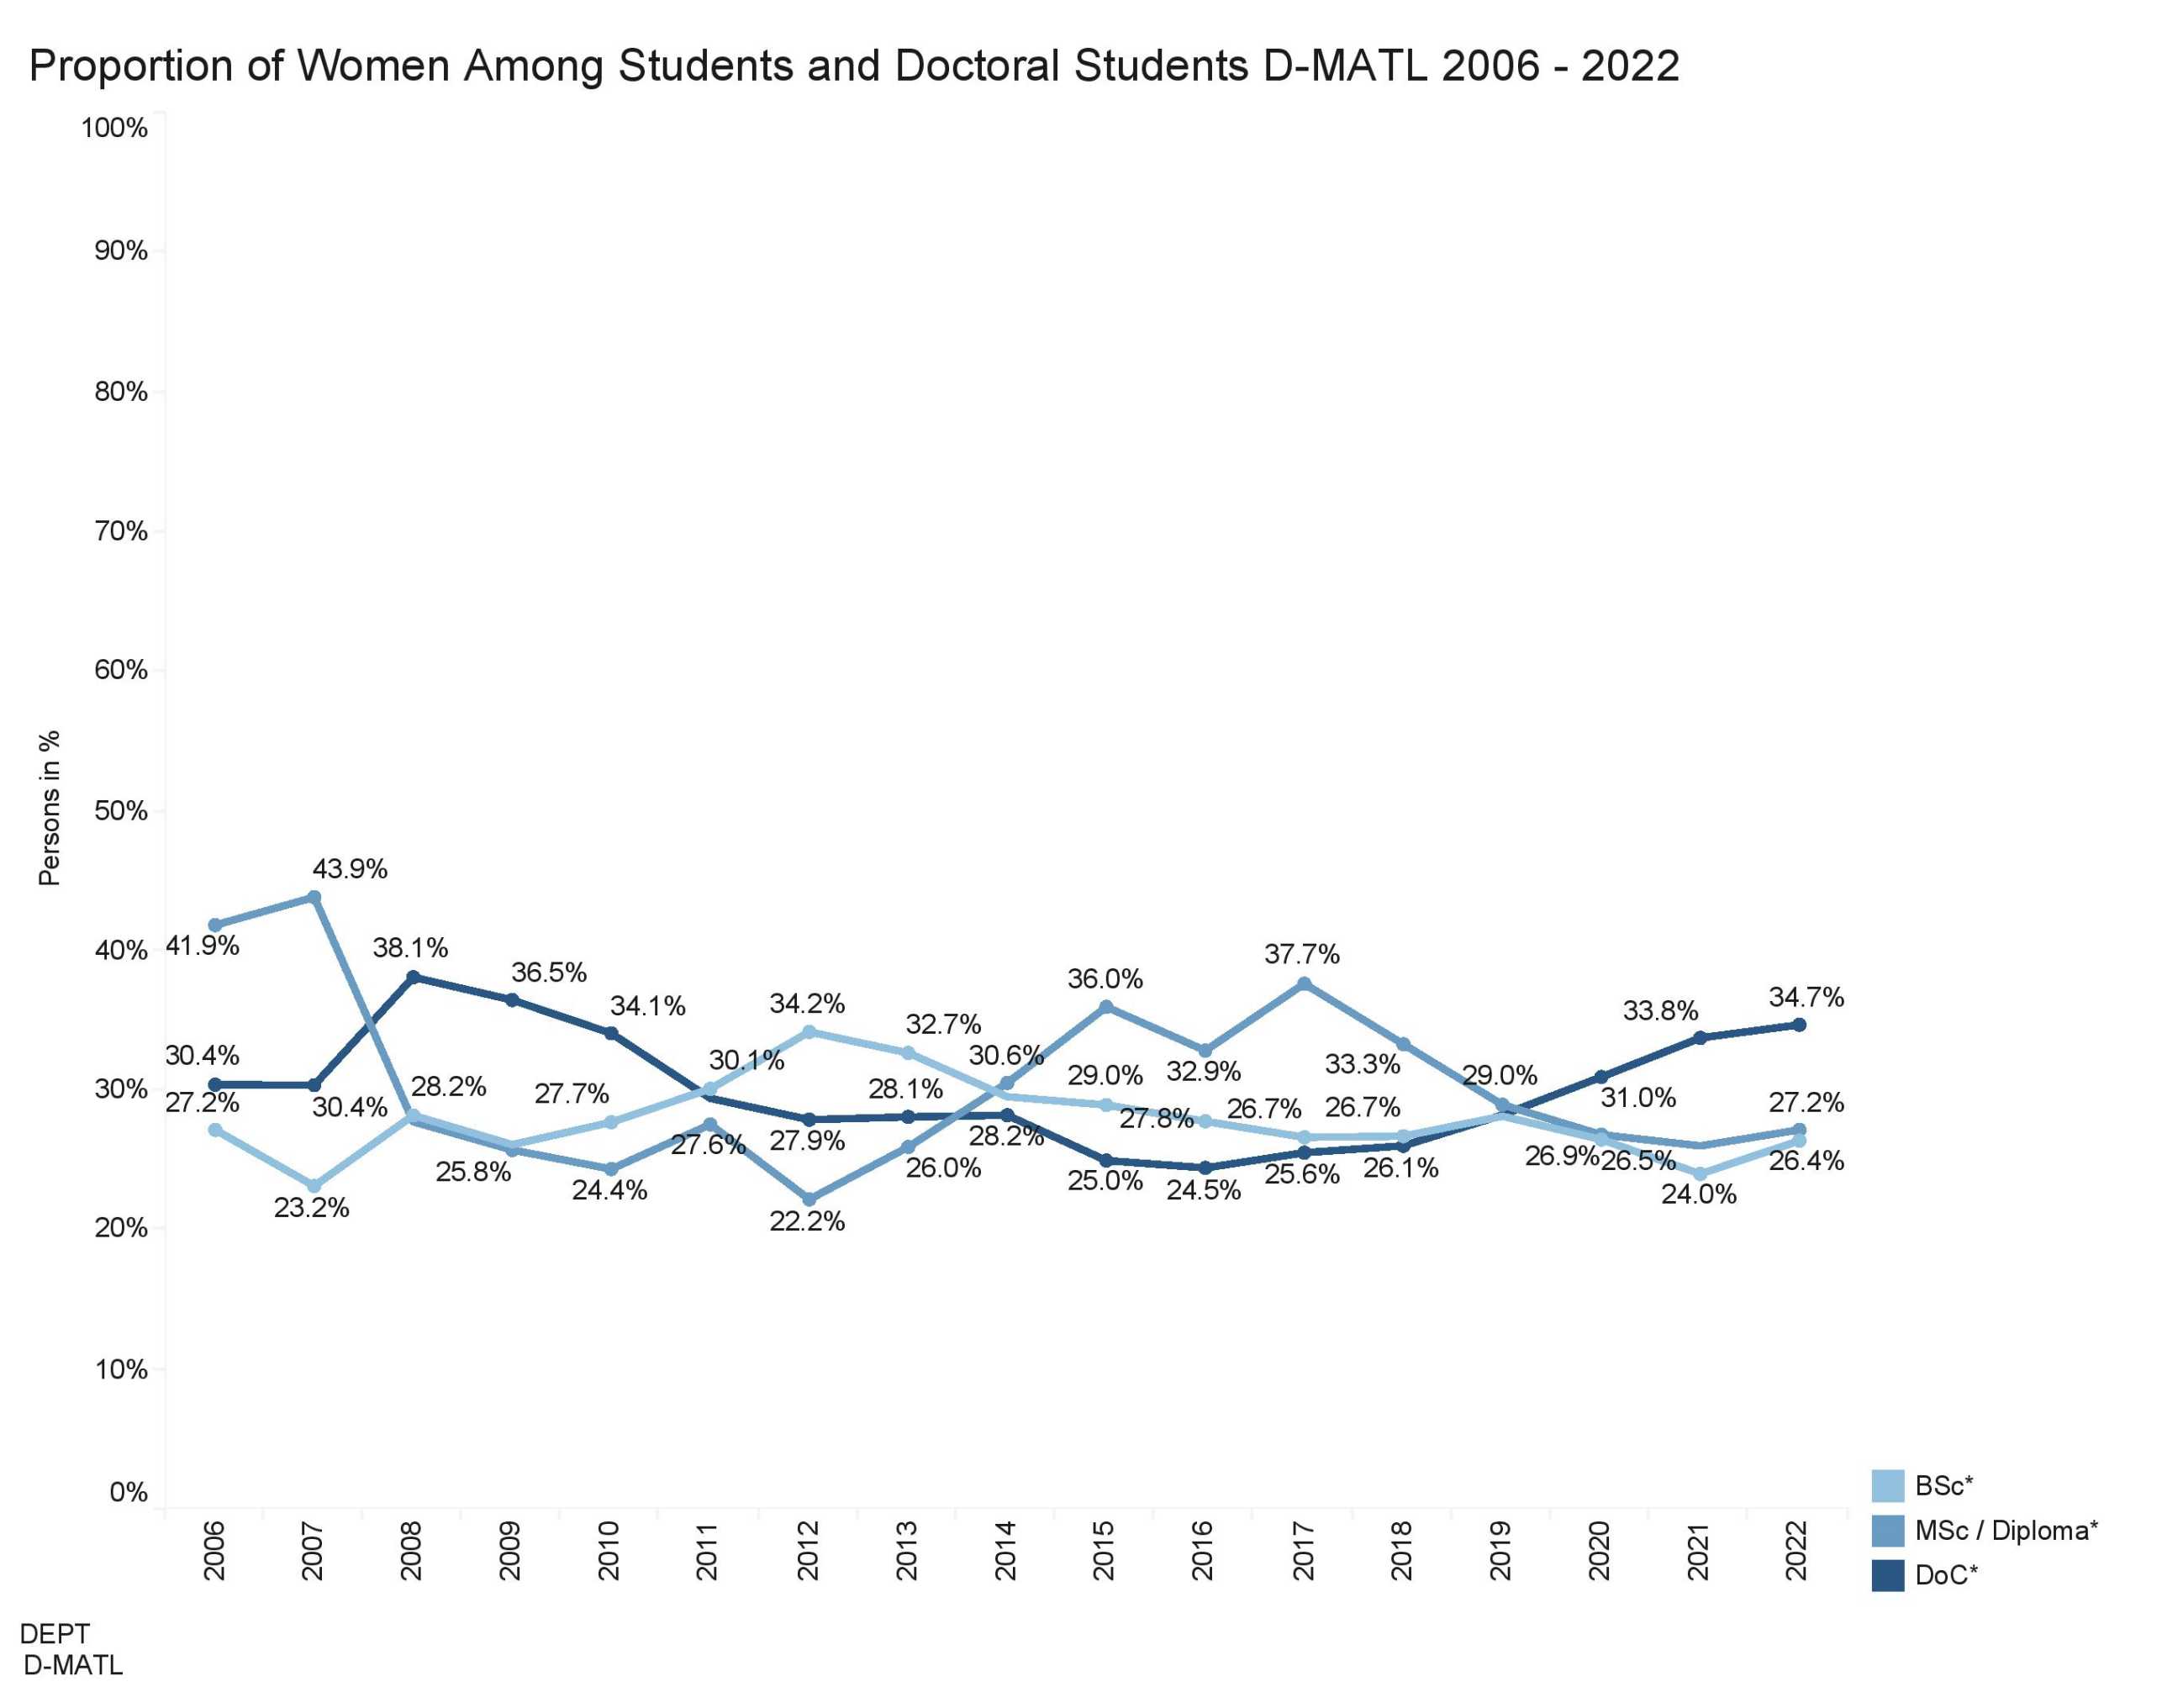 Vergrösserte Ansicht: Proportion of Women Among Students and Doctoral Students D-MATL 2006 - 2022